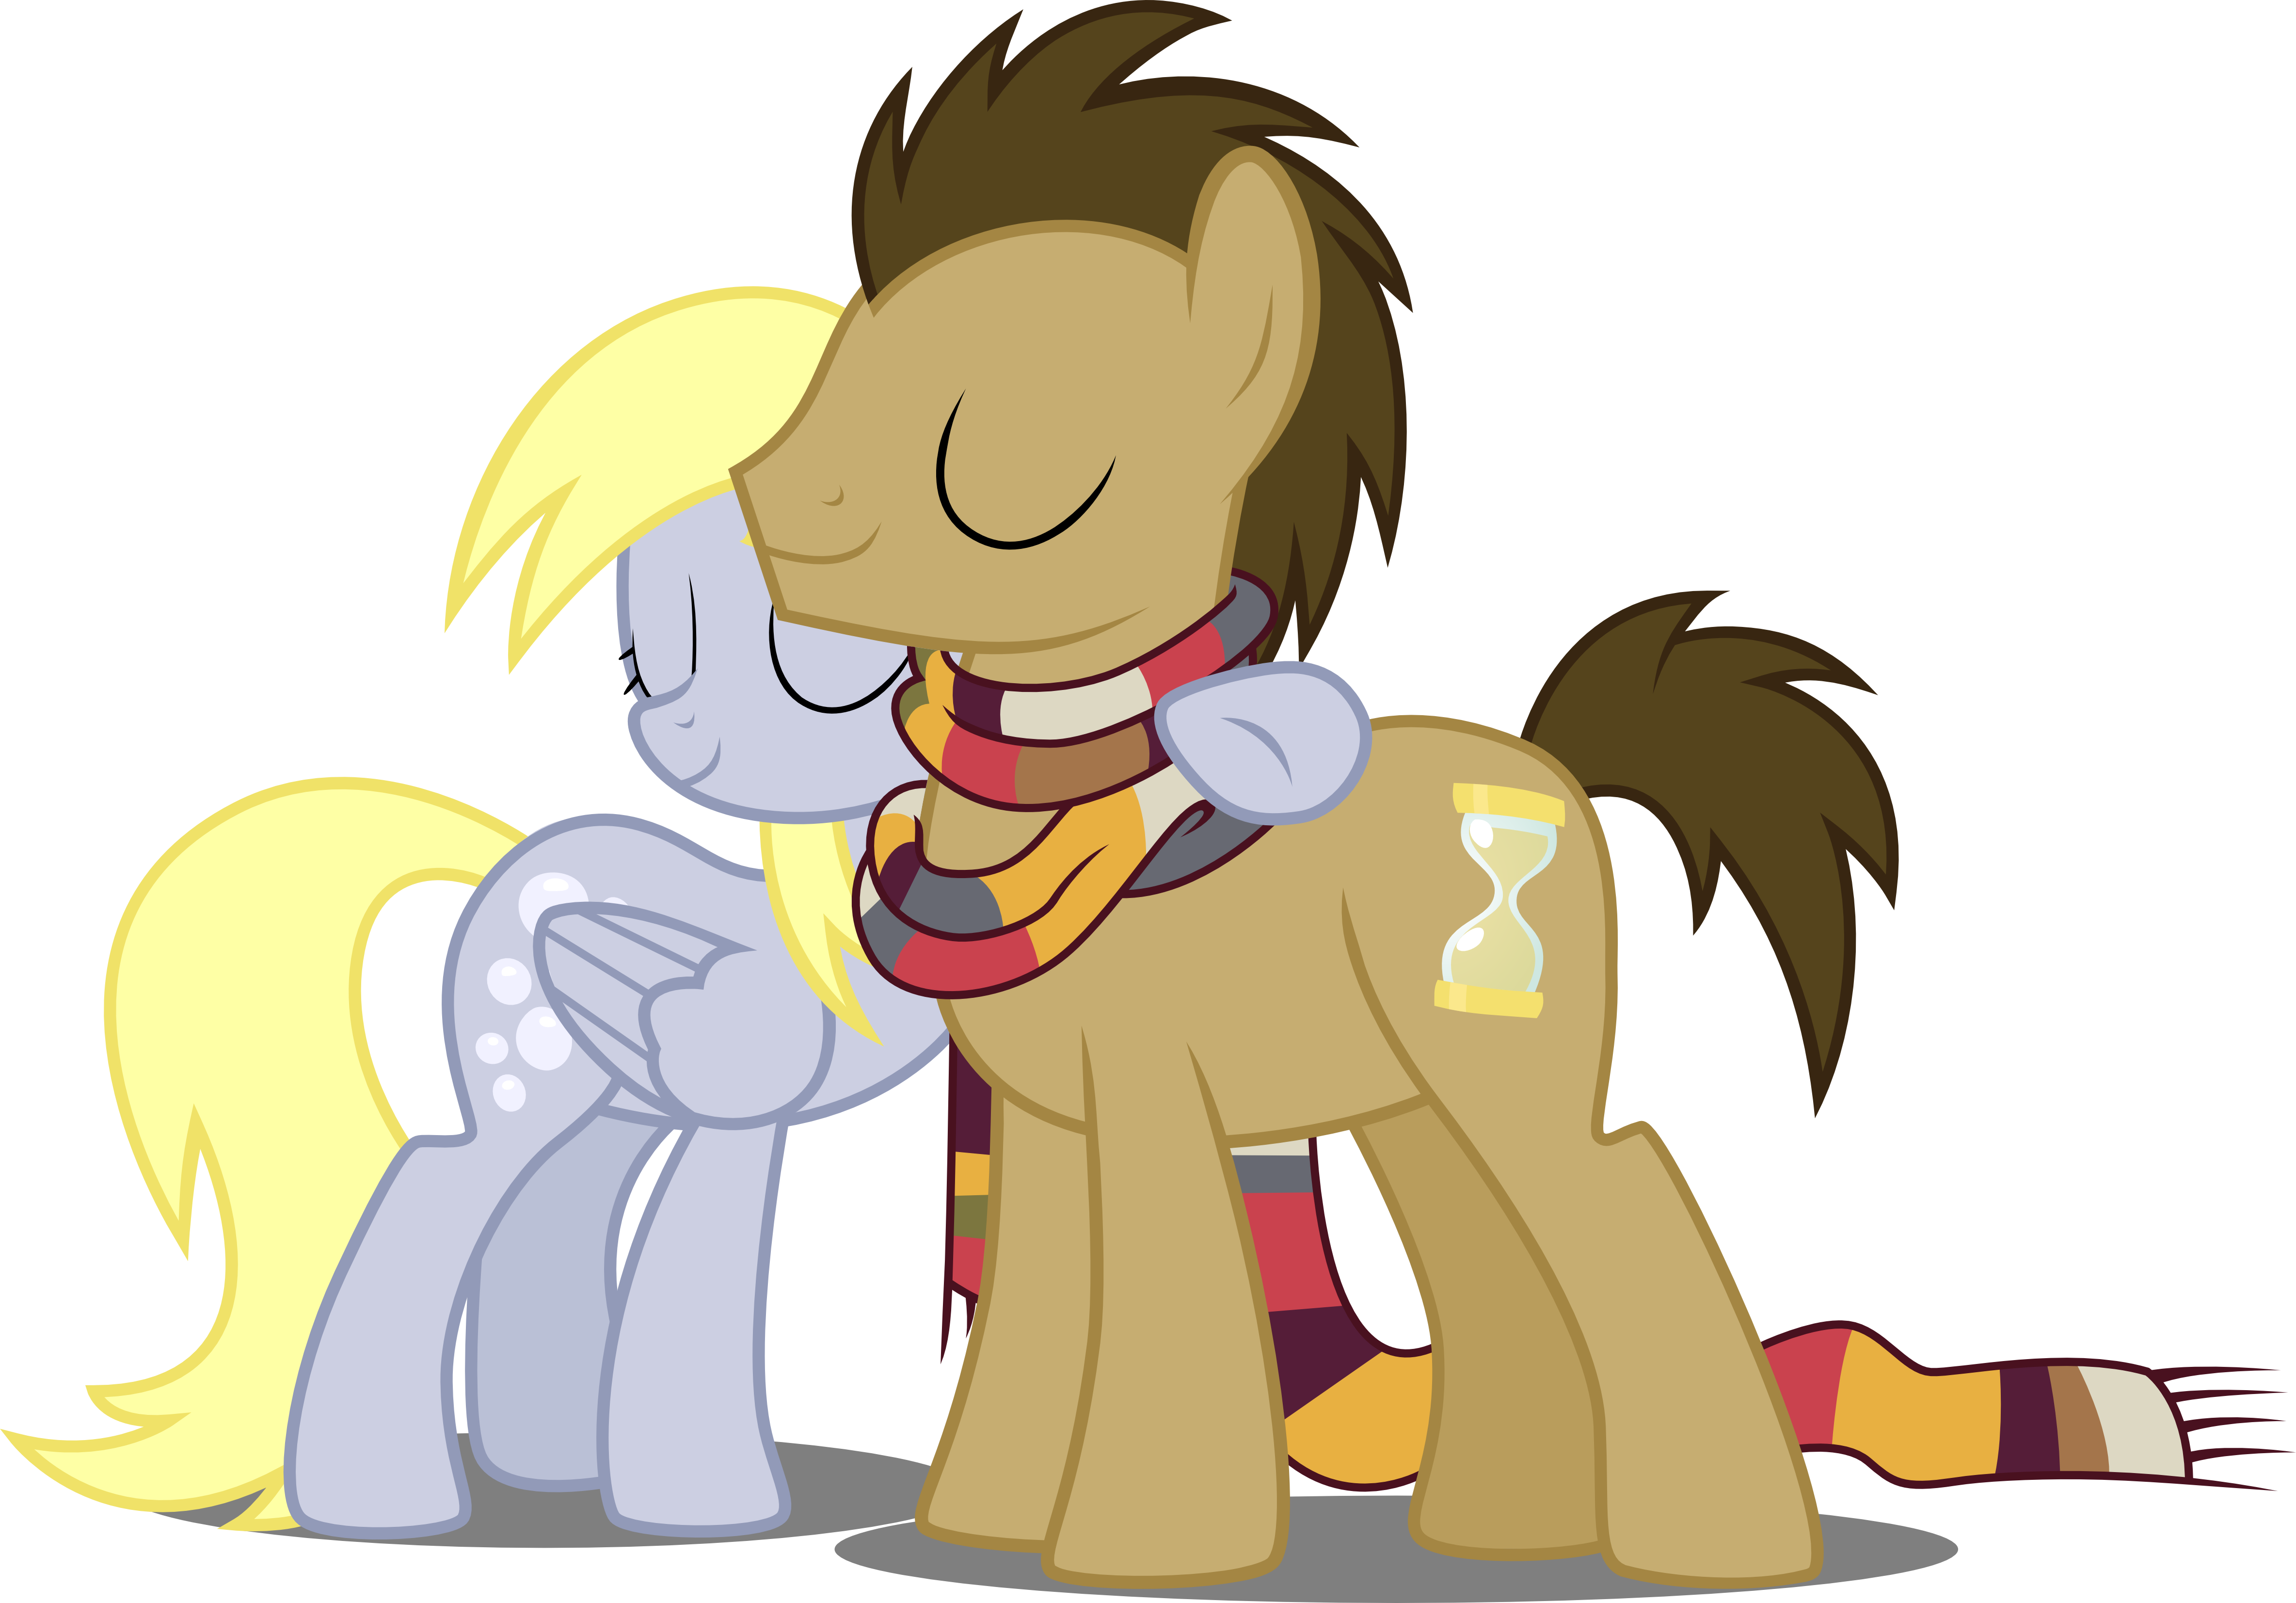 derpy_and_doctor_by_drakizora-d8x7v7r.pn